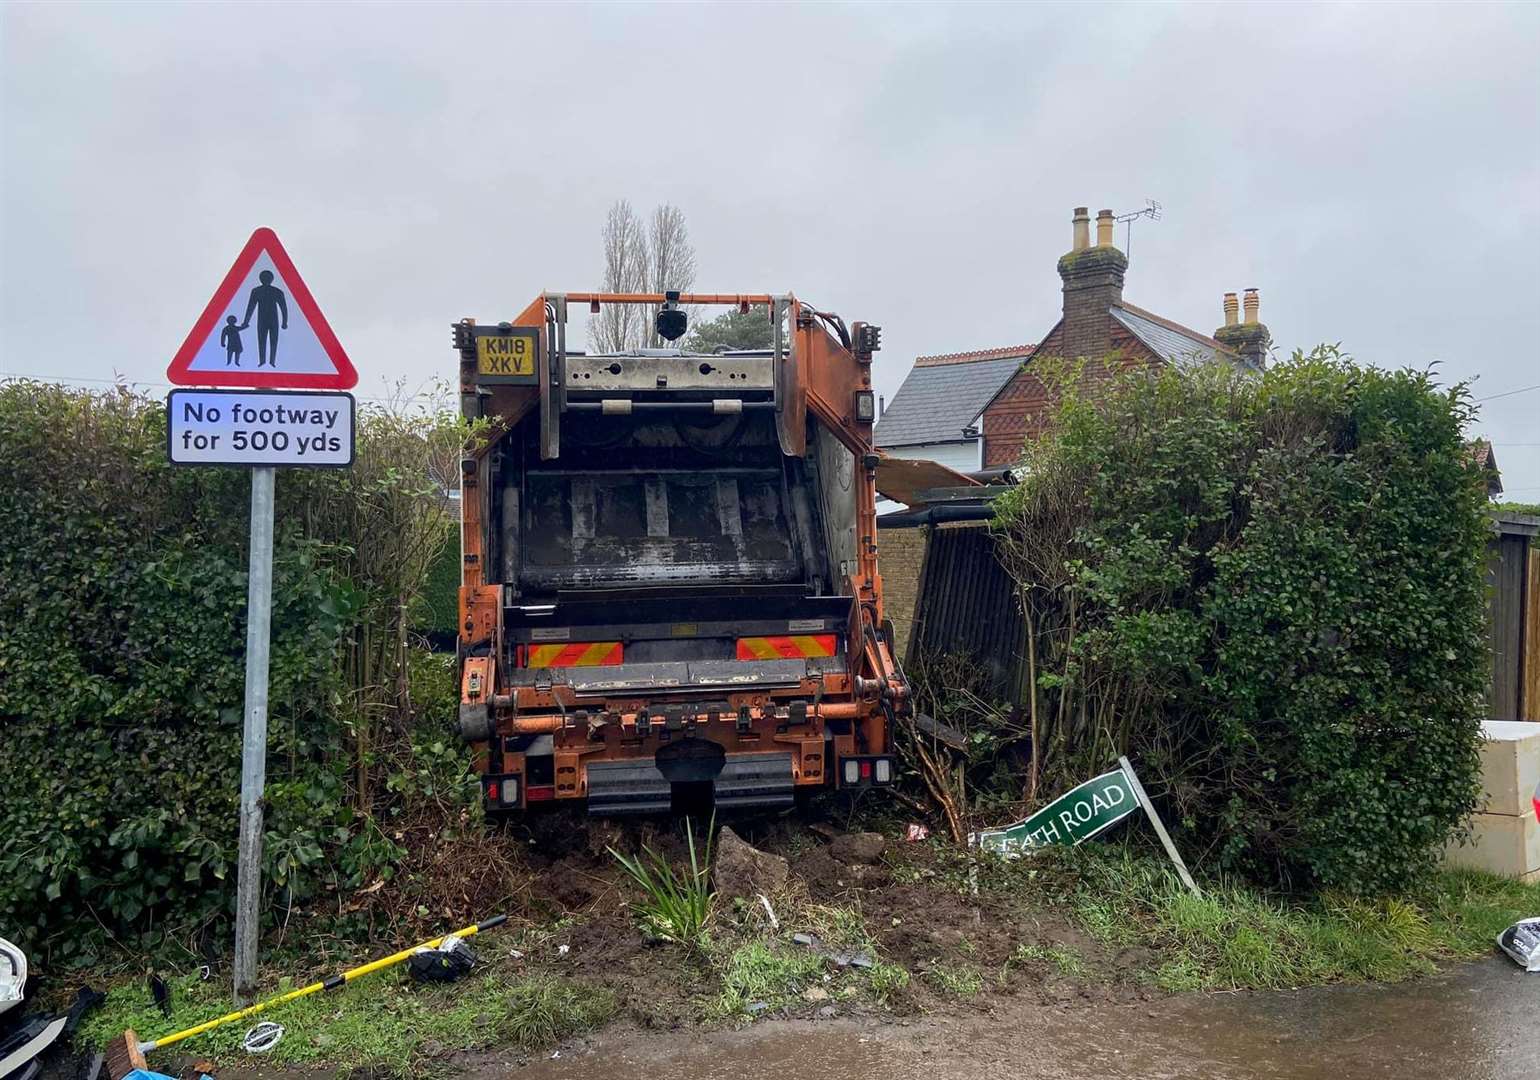 A bin lorry has ploughed into a bush after a crash in Langley, near Maidstone, this morning. Picture: Chris Yorke